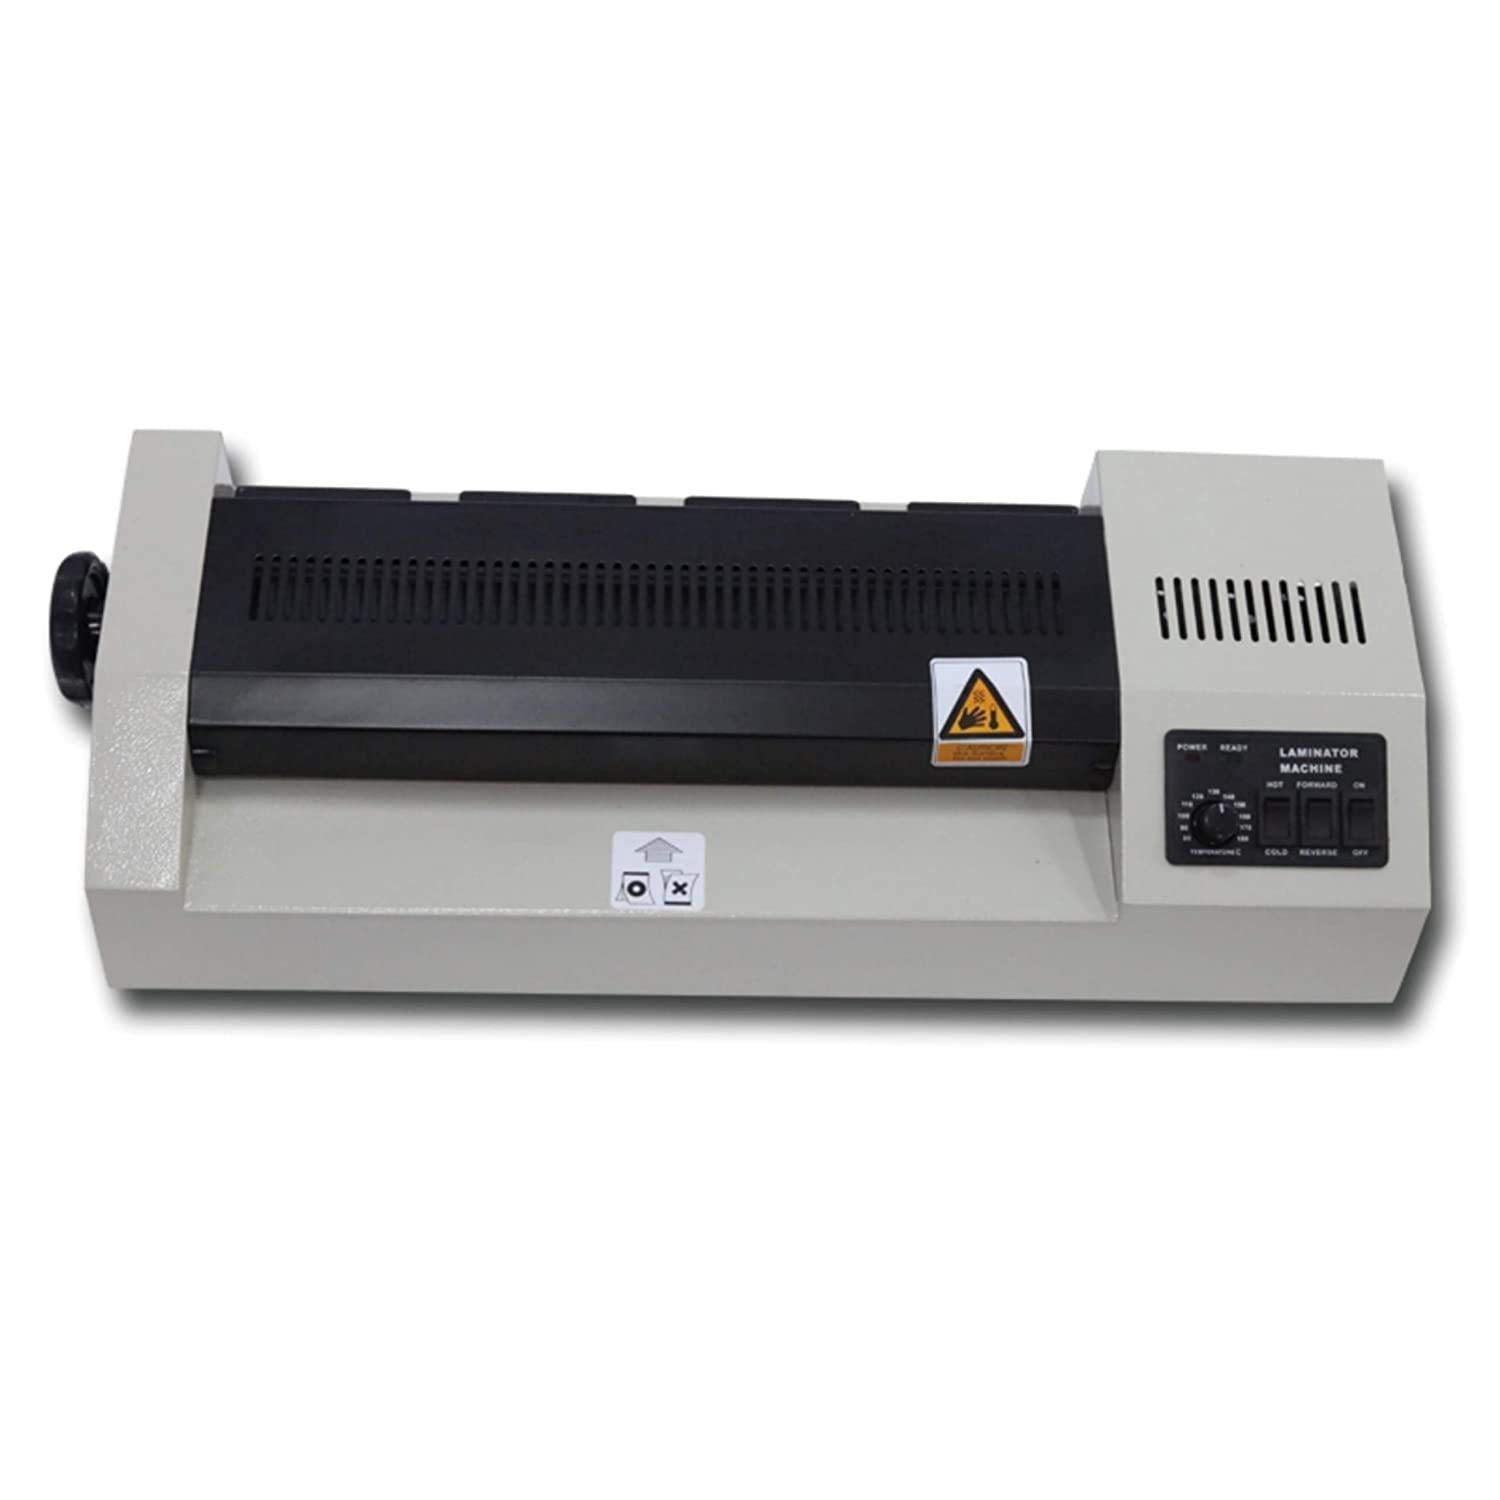 JD9 Professional Lamination/Laminating Machine Compact- Fully Automatic Professional Lamination Machine/Laminator for Upto A3 Size with Hot and Cold Lamination(Photos ID,I-Card,Document,Certificate).